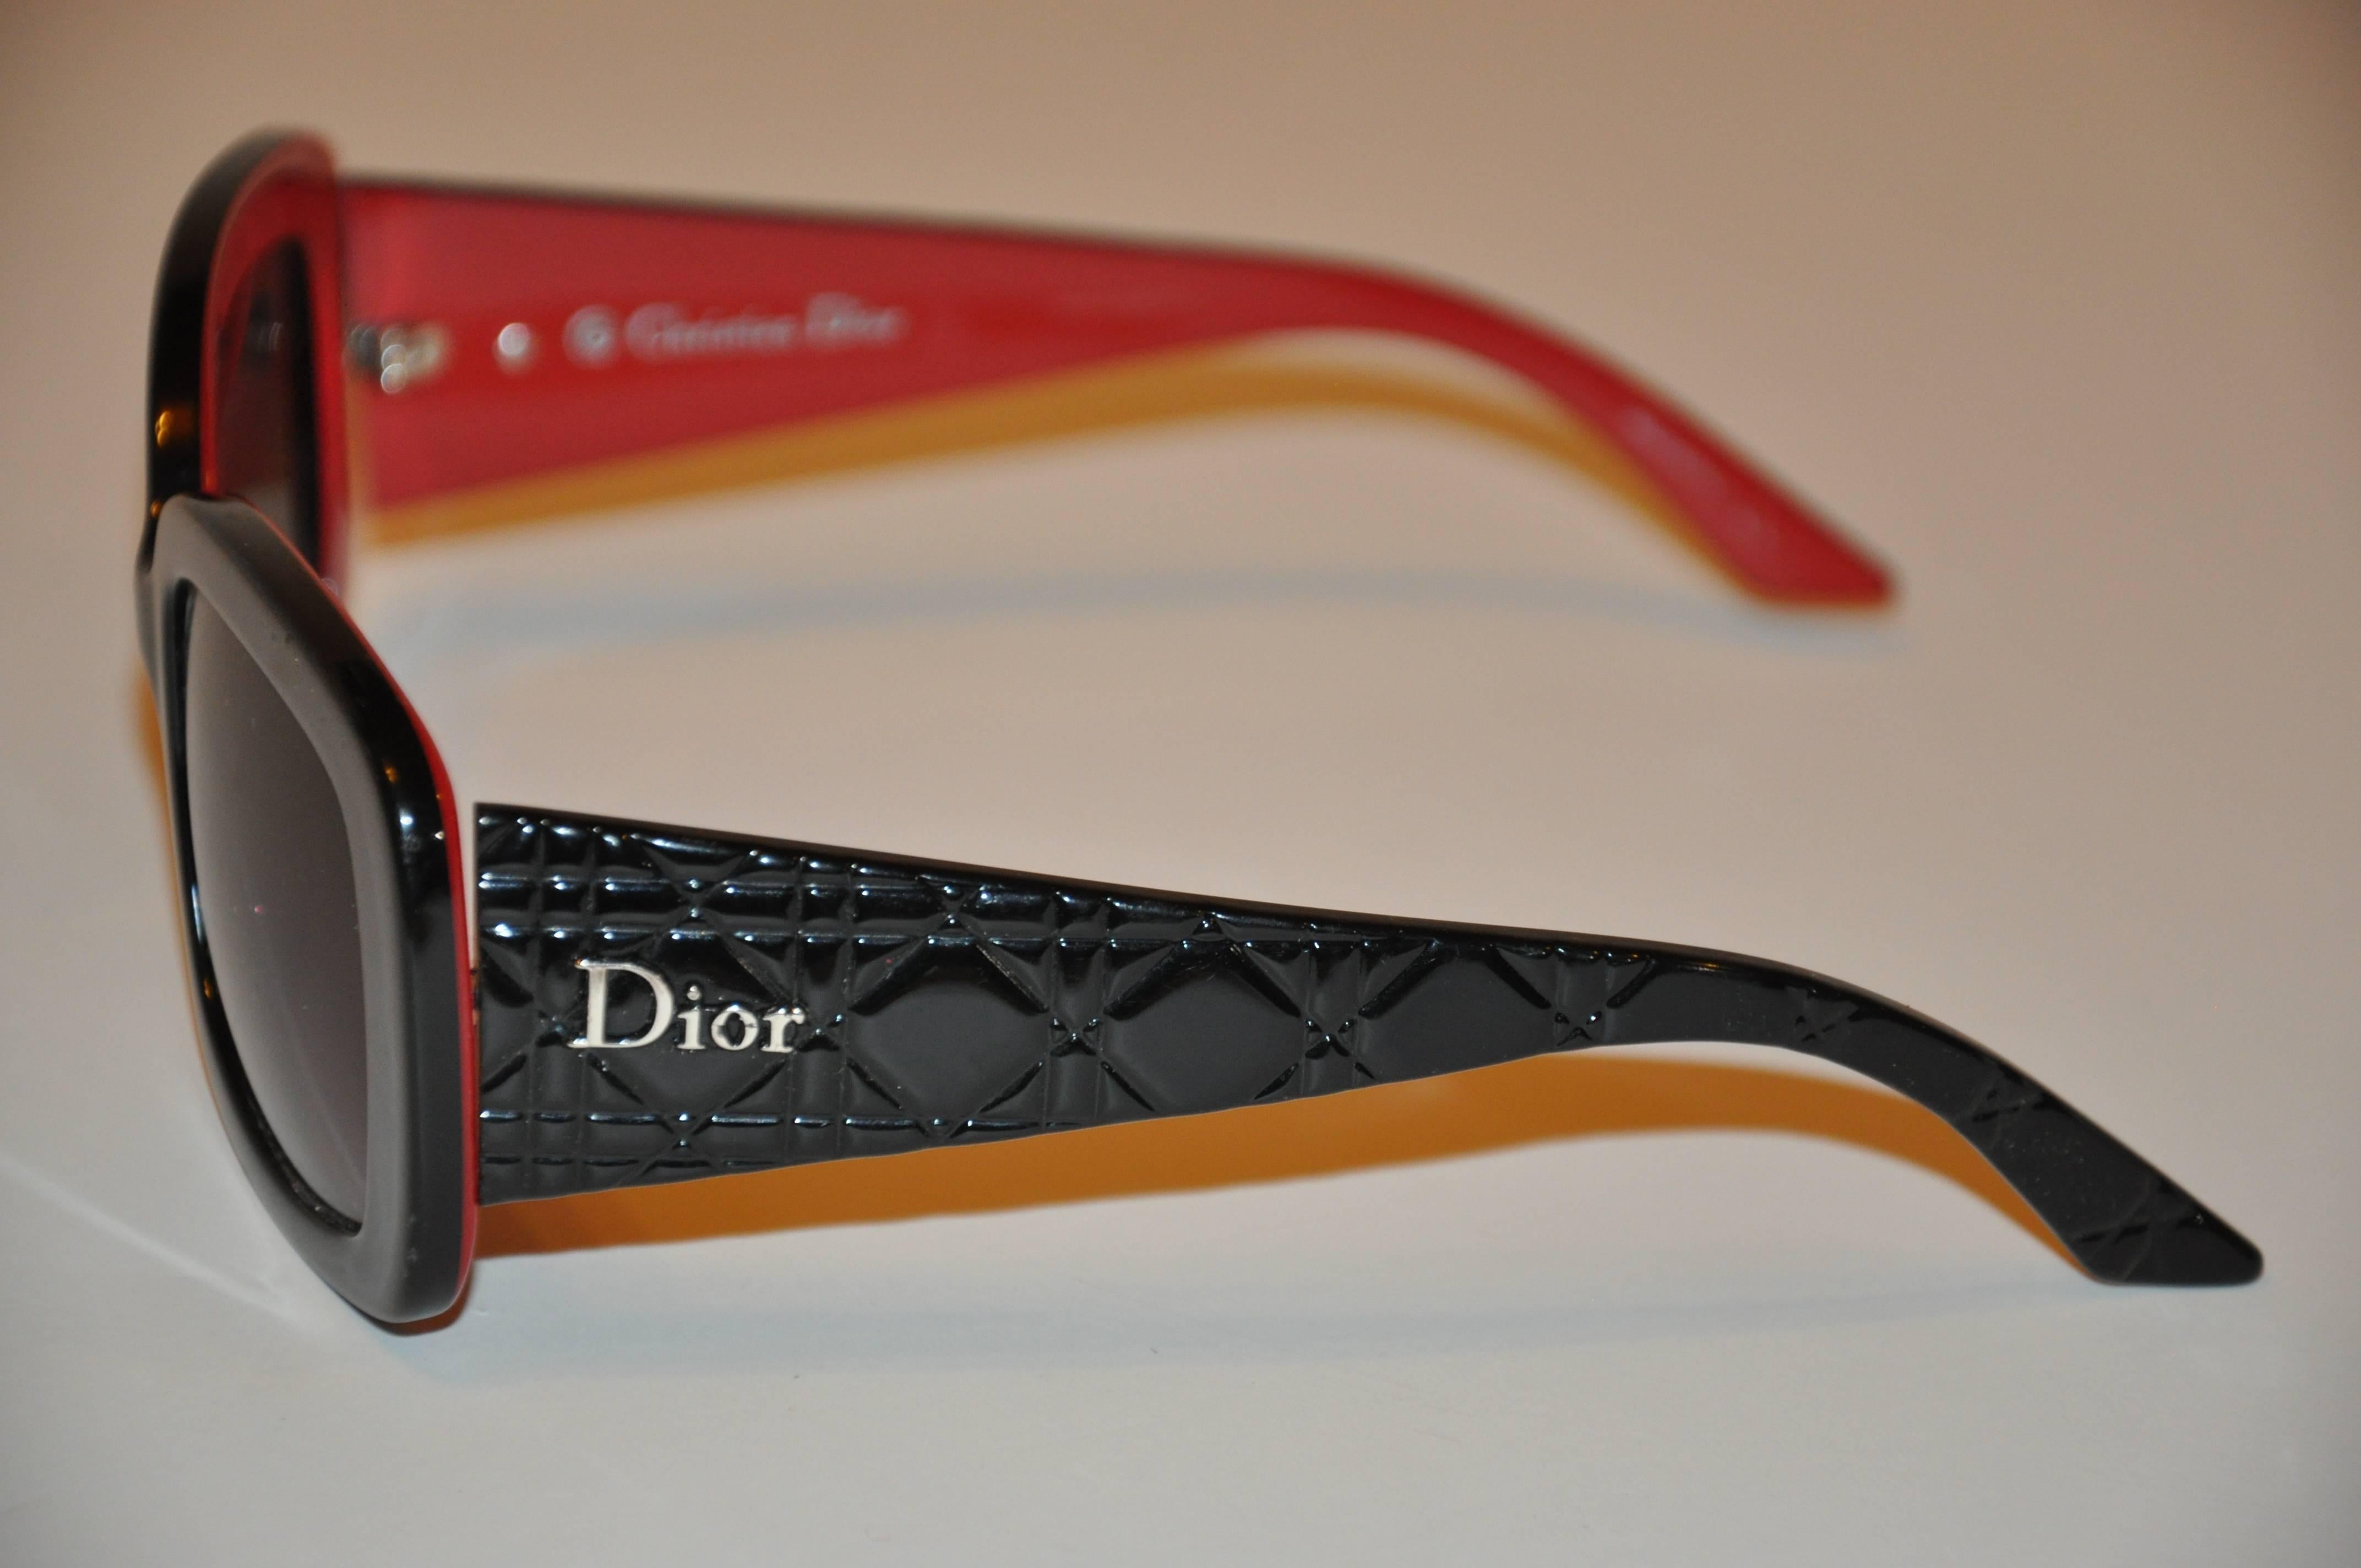        Christian Dior thick black lucite sunglasses are accented with lucite interior in brick color.  The sides are accented with detailed quilting. The width across the front measures 5 3/4